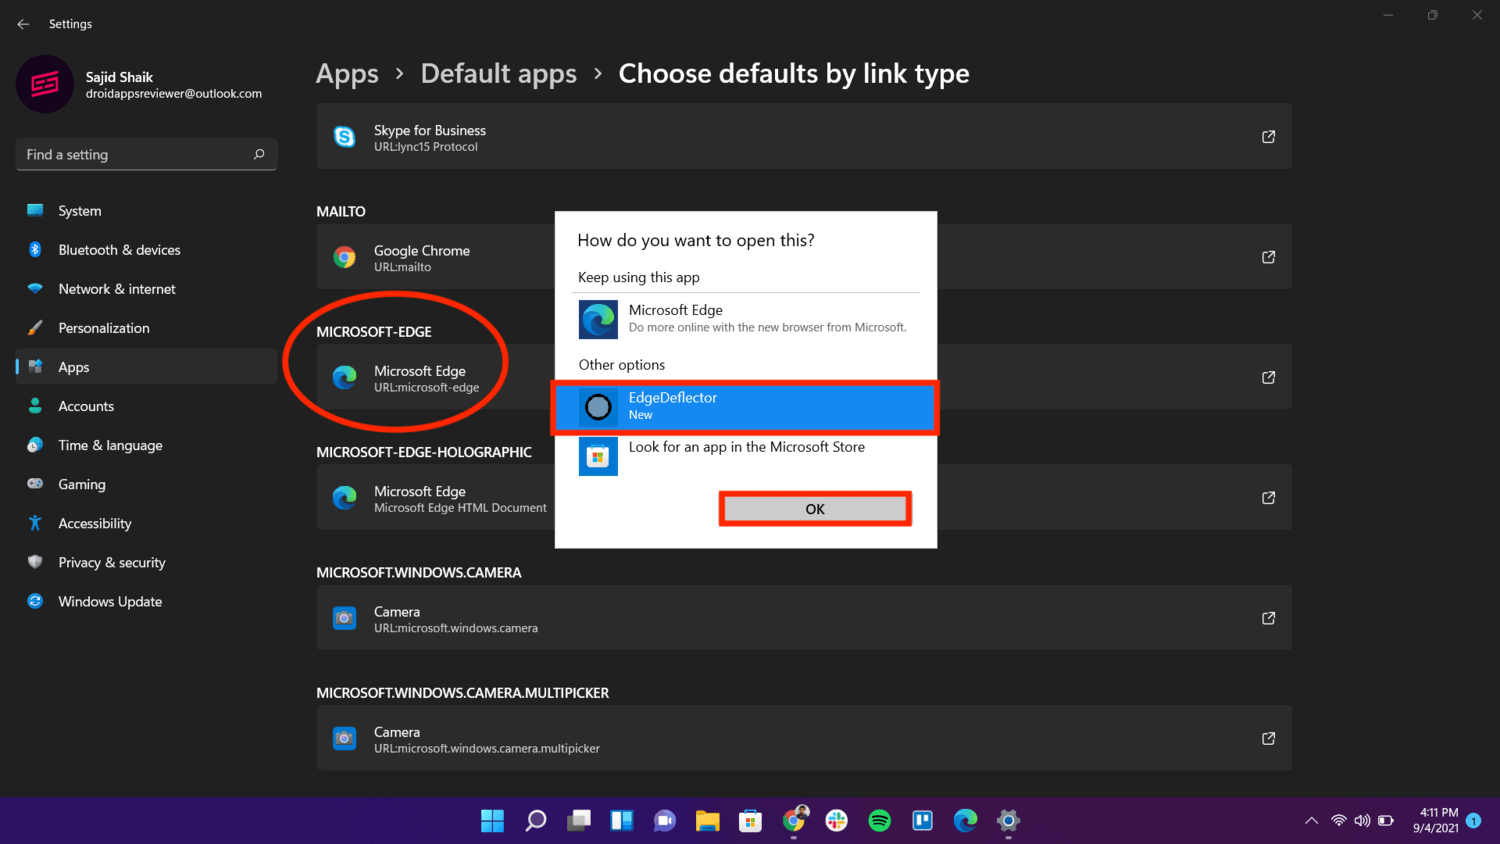 Select Microsoft Edge icon under MICROSOFT-EDGE and select EdgeDeflector and then OK